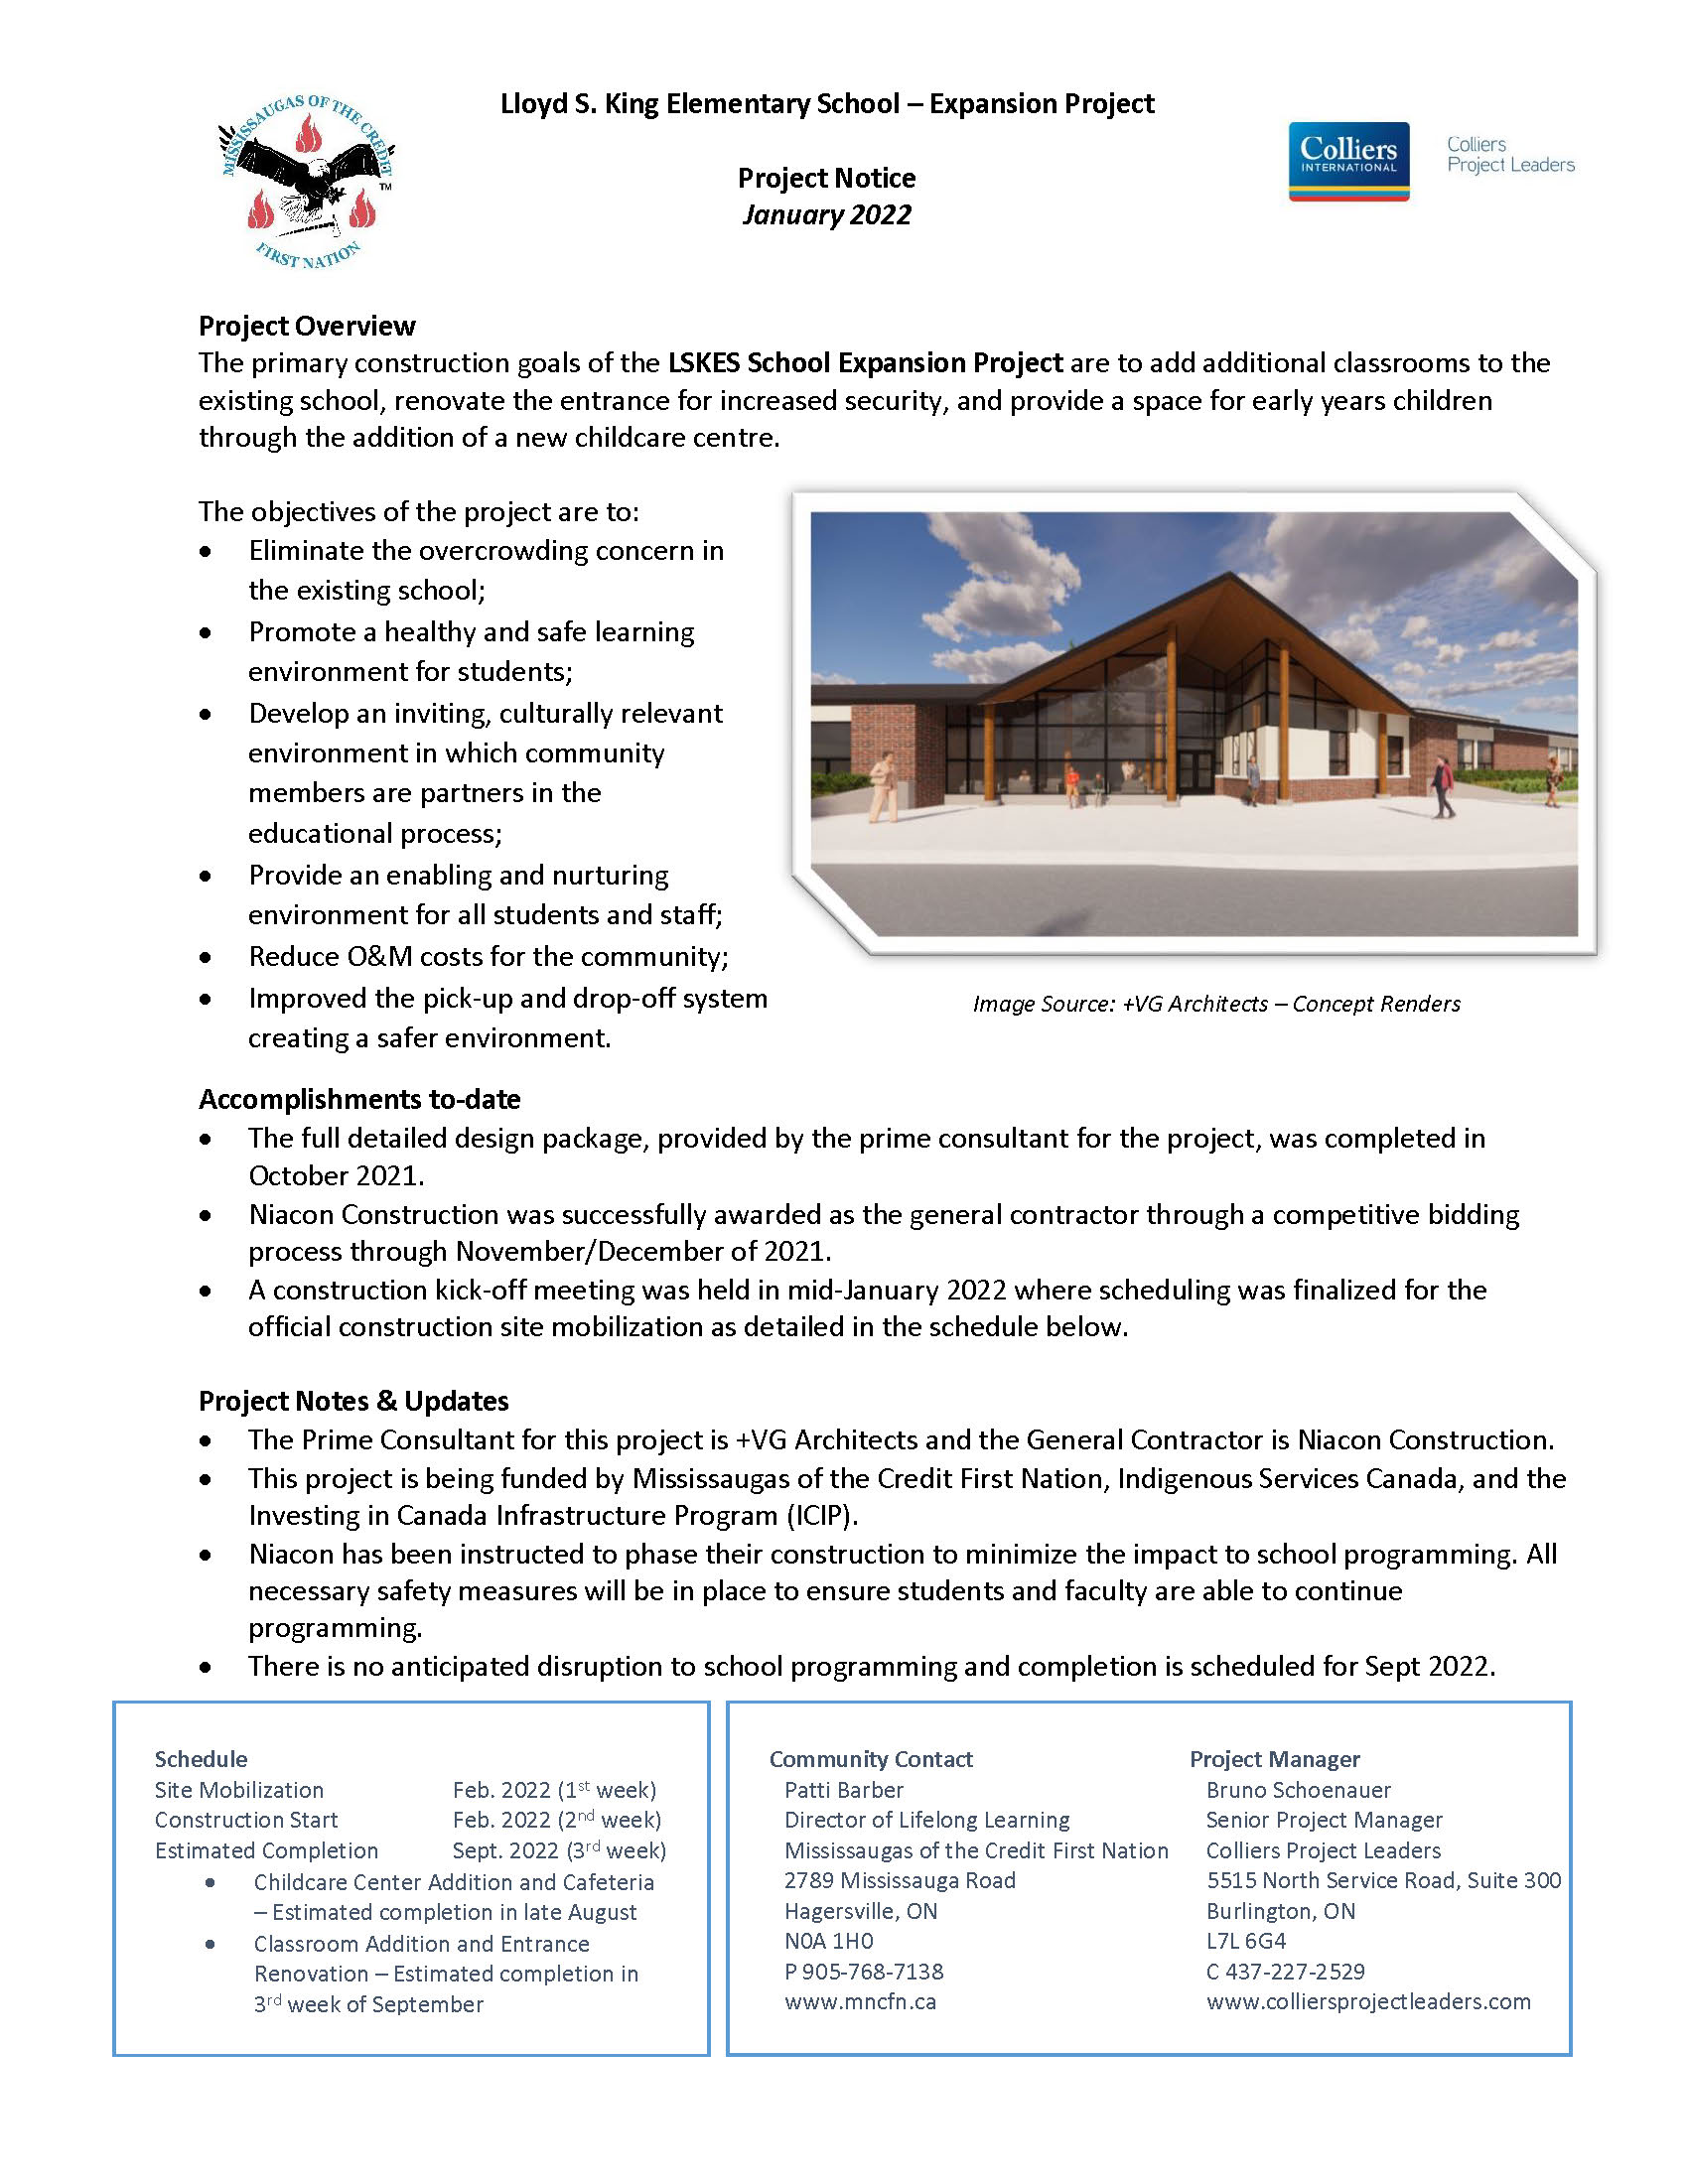 Lloyd S. King Elementary School – Expansion Project - Project Notice